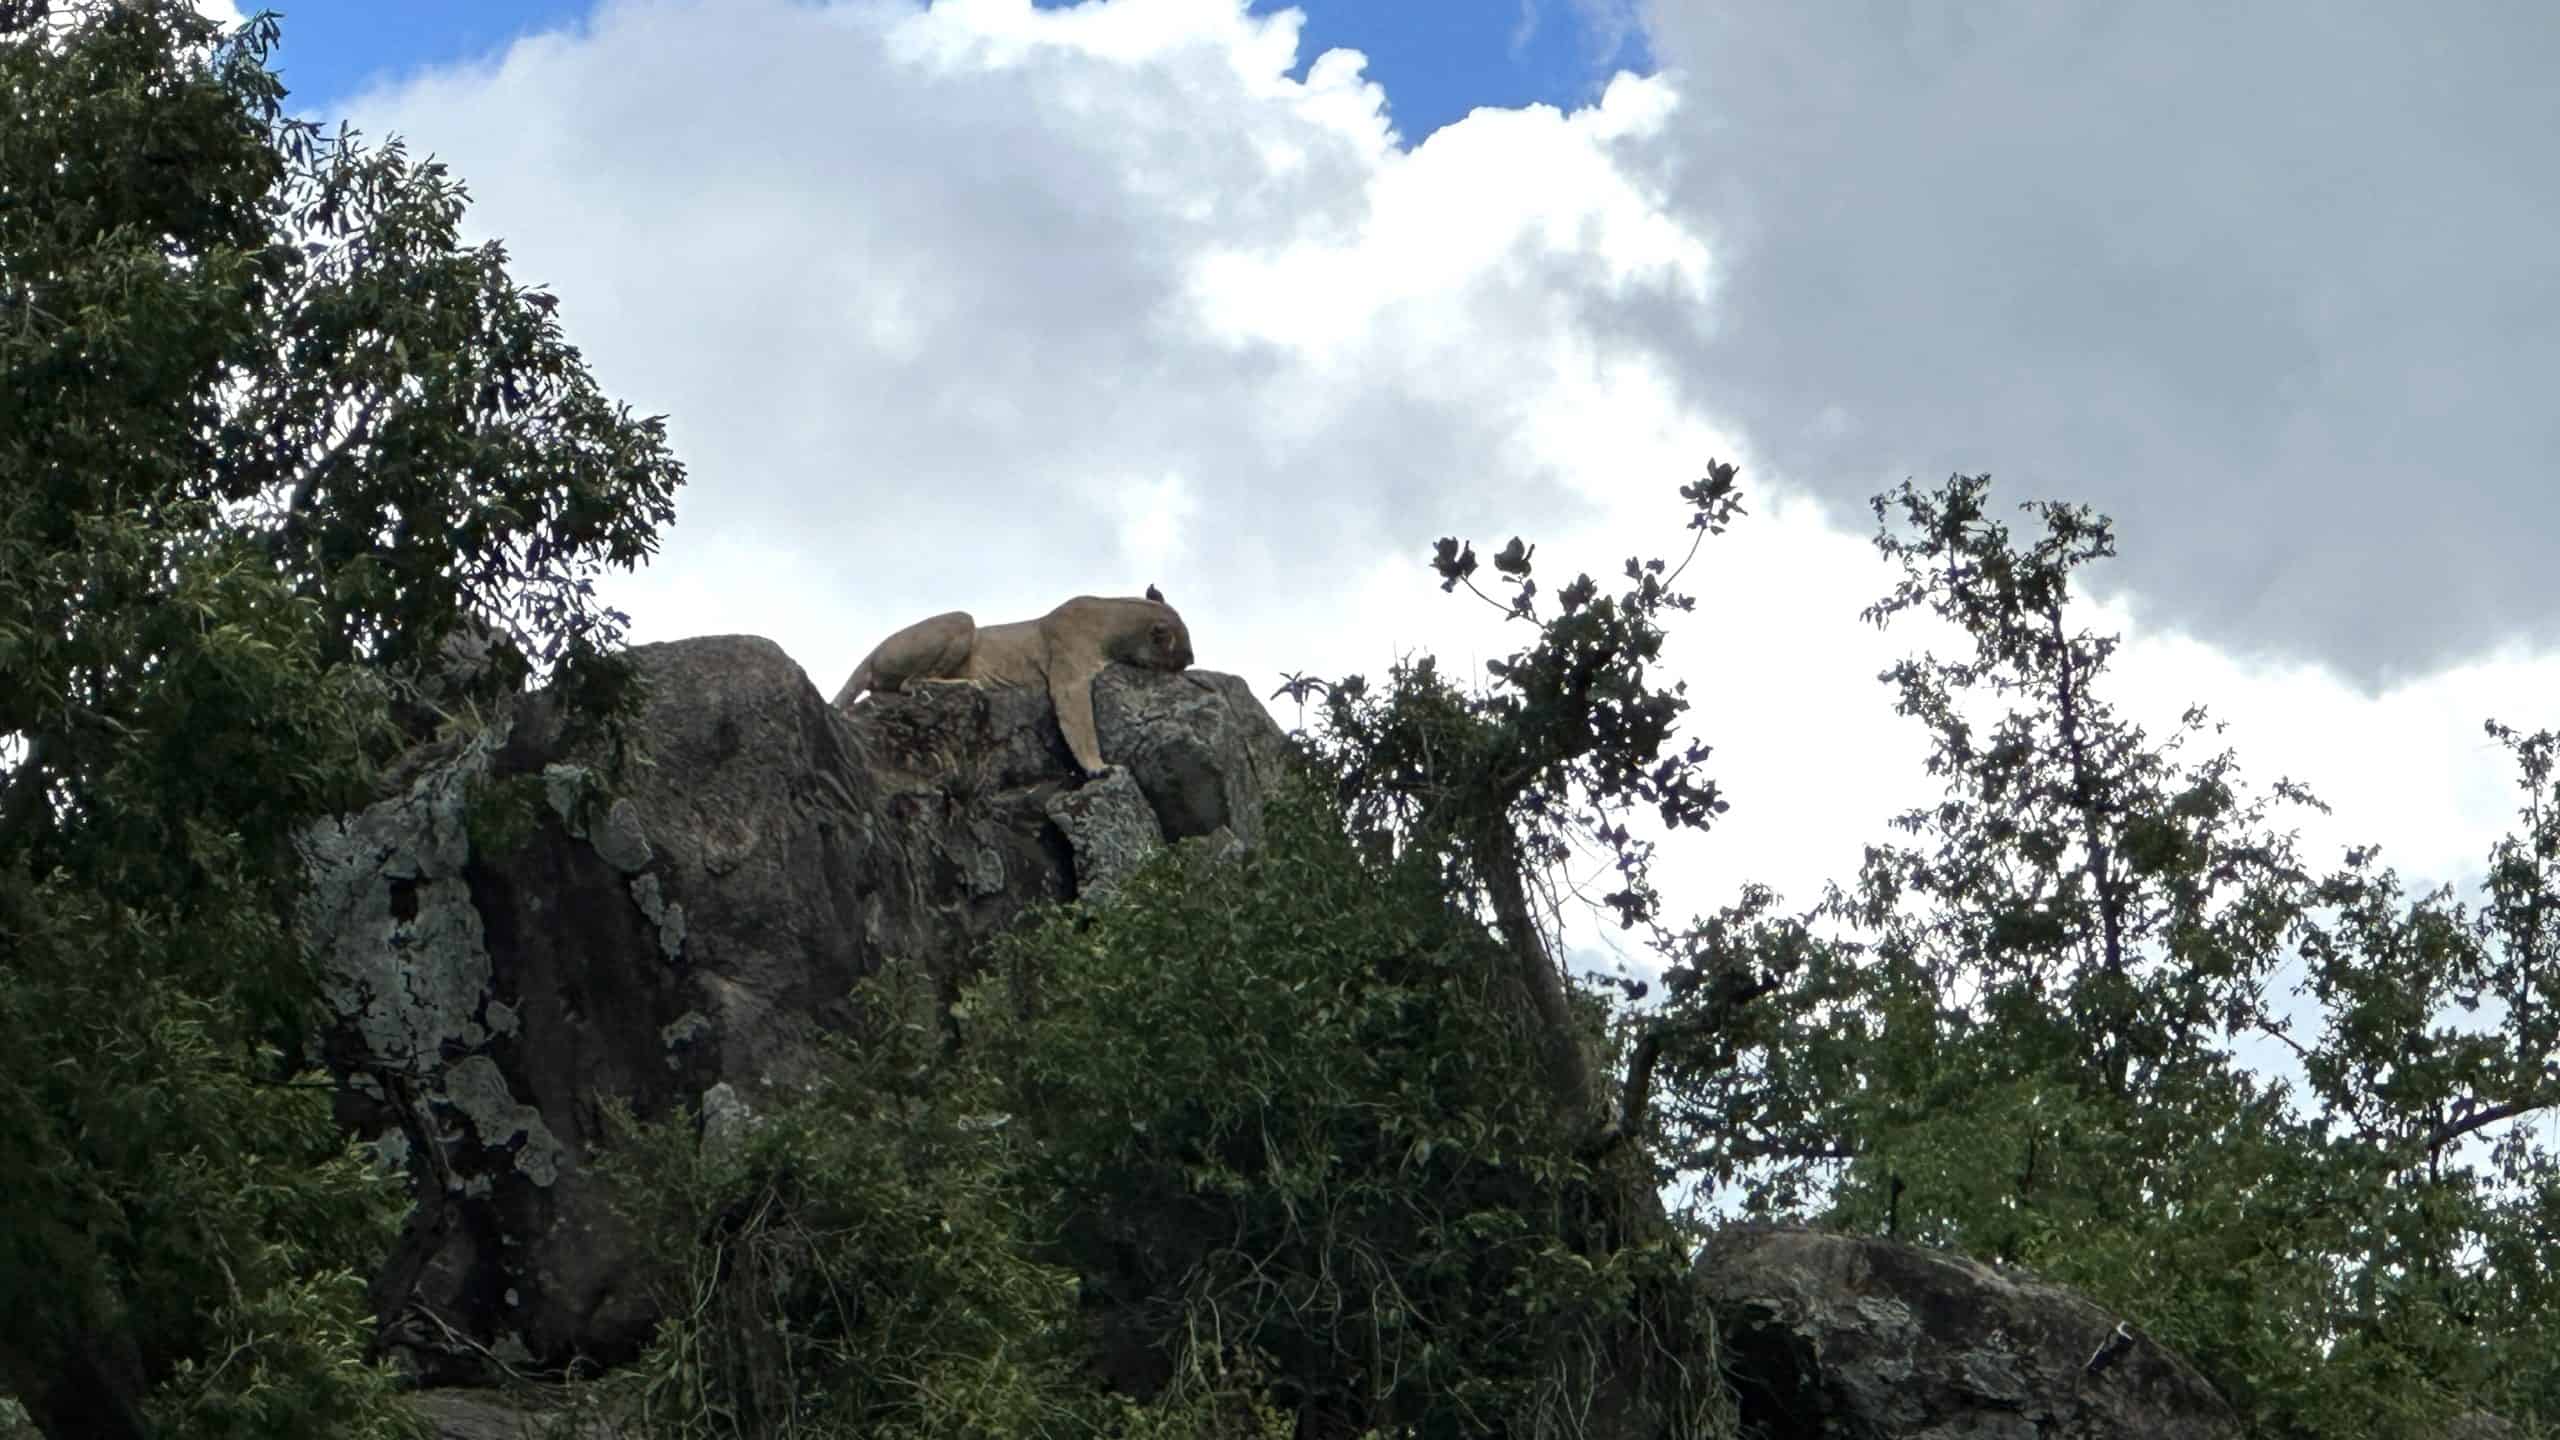 Lion sleeping up on a rock